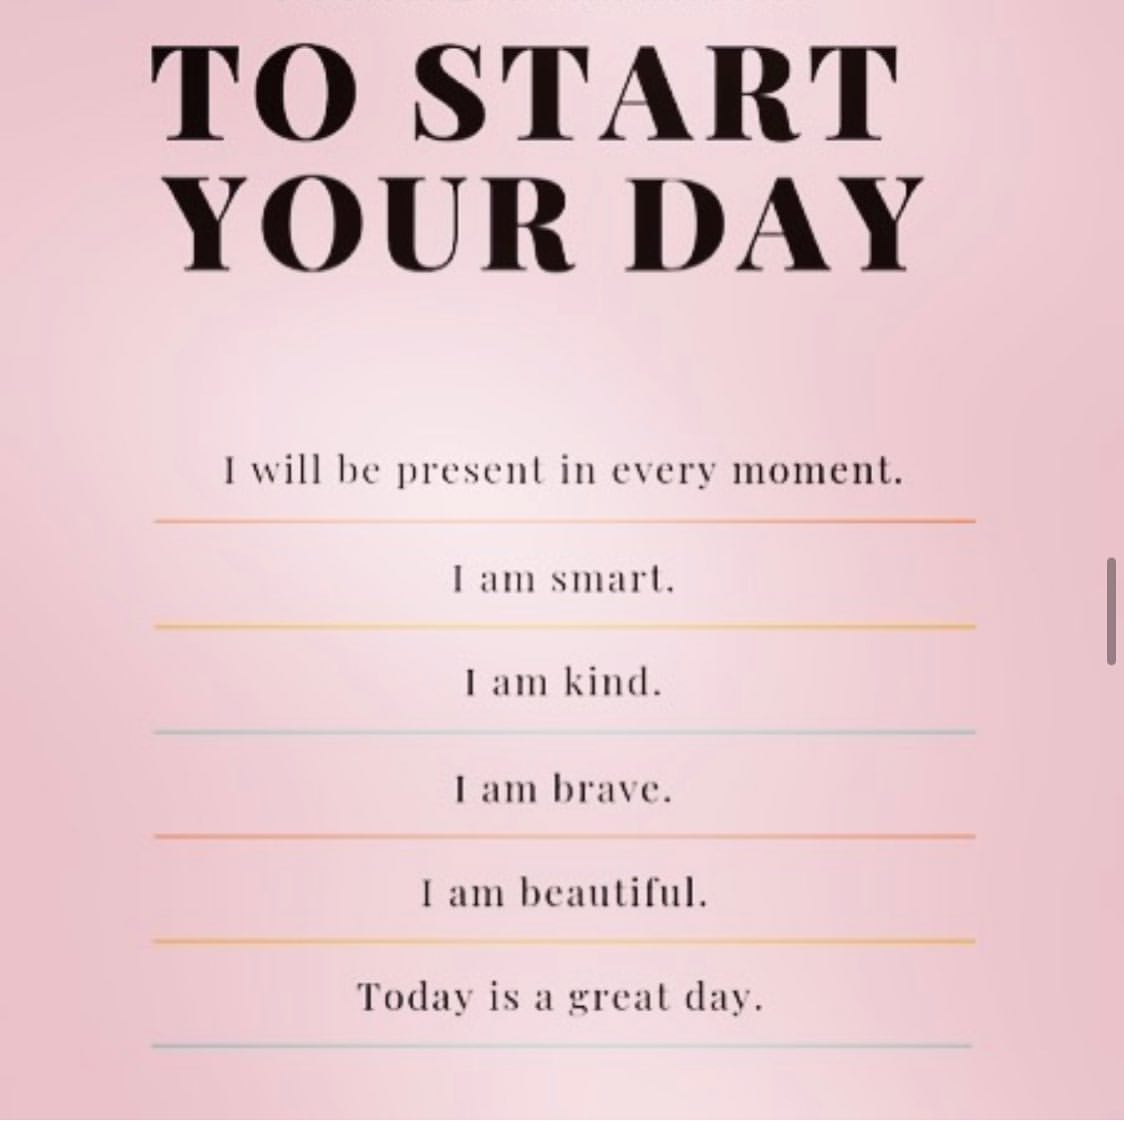 To start your day I will be present in every moment. I am smart. I a kind. I am brave. I am beautiful. Today is a great day.